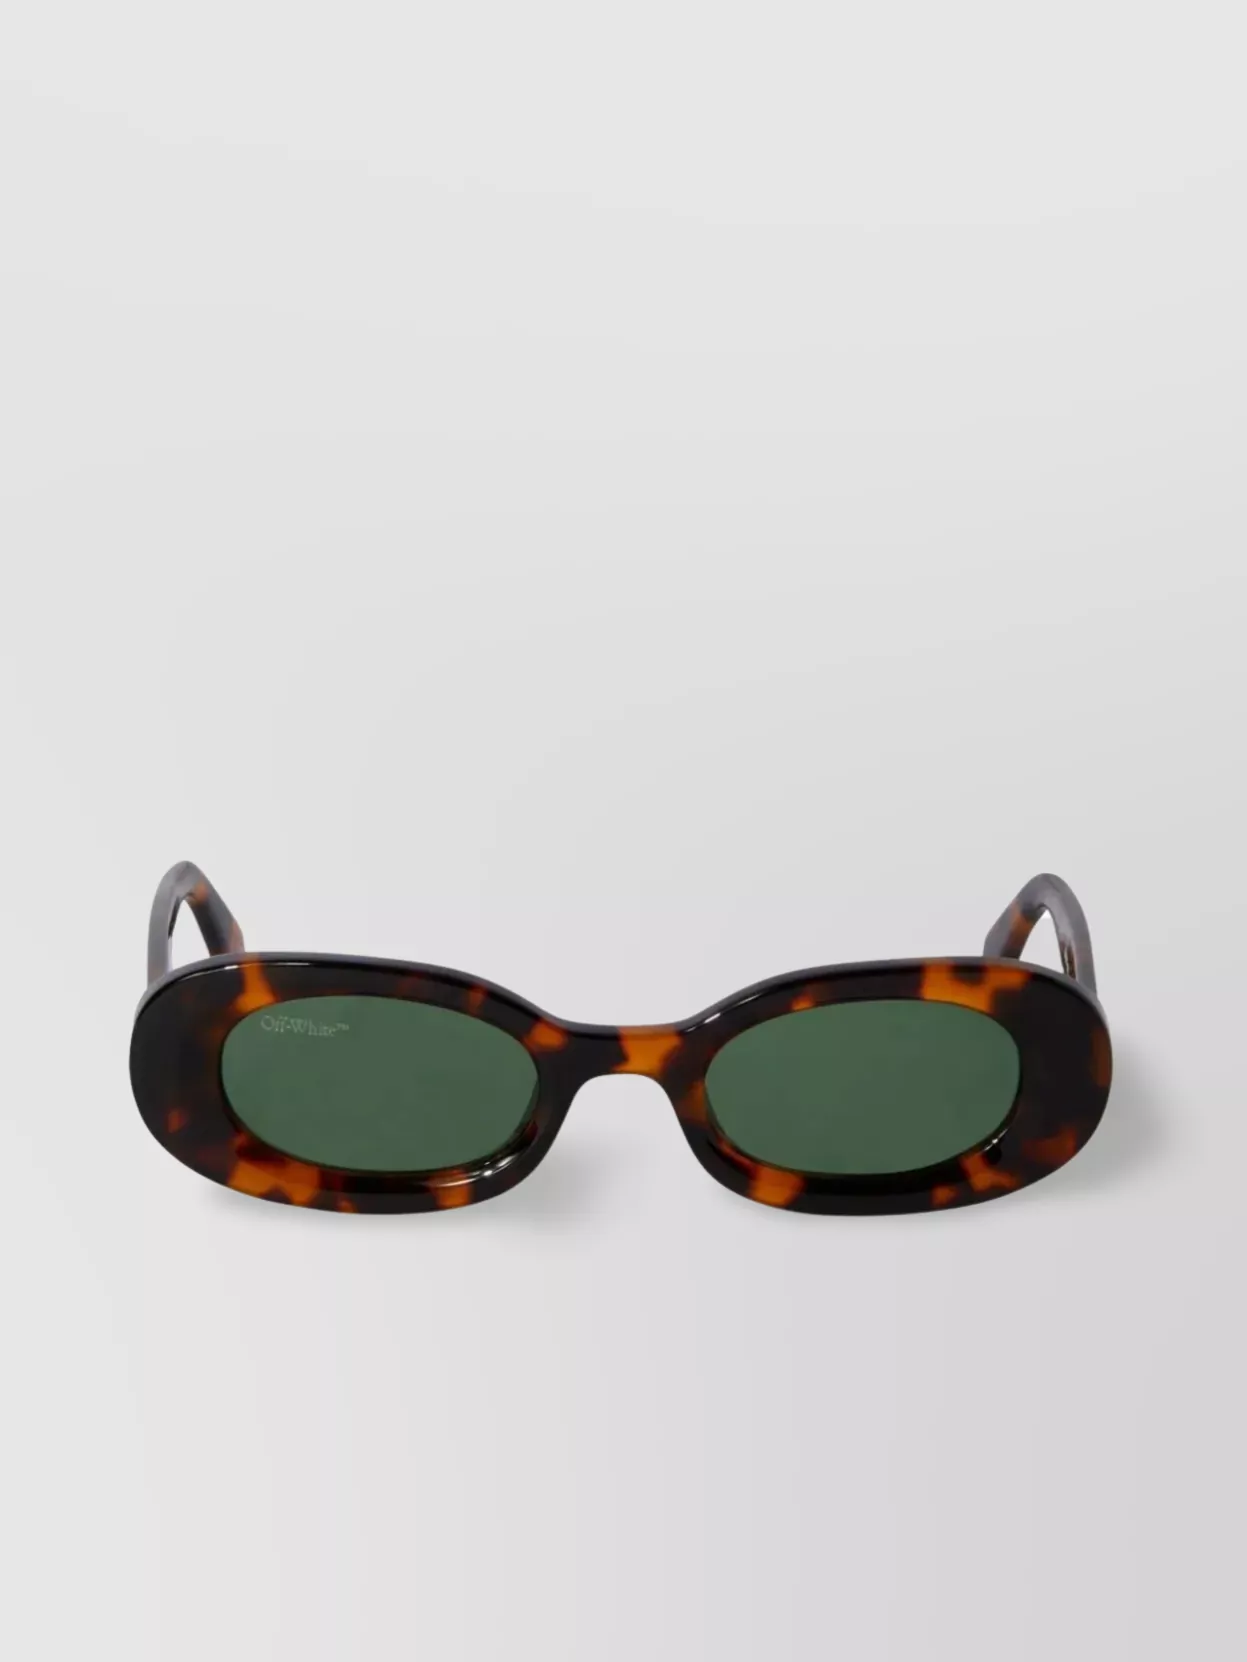 OFF-WHITE AMALFI OVAL SUNGLASSES WITH CURVED TIPS